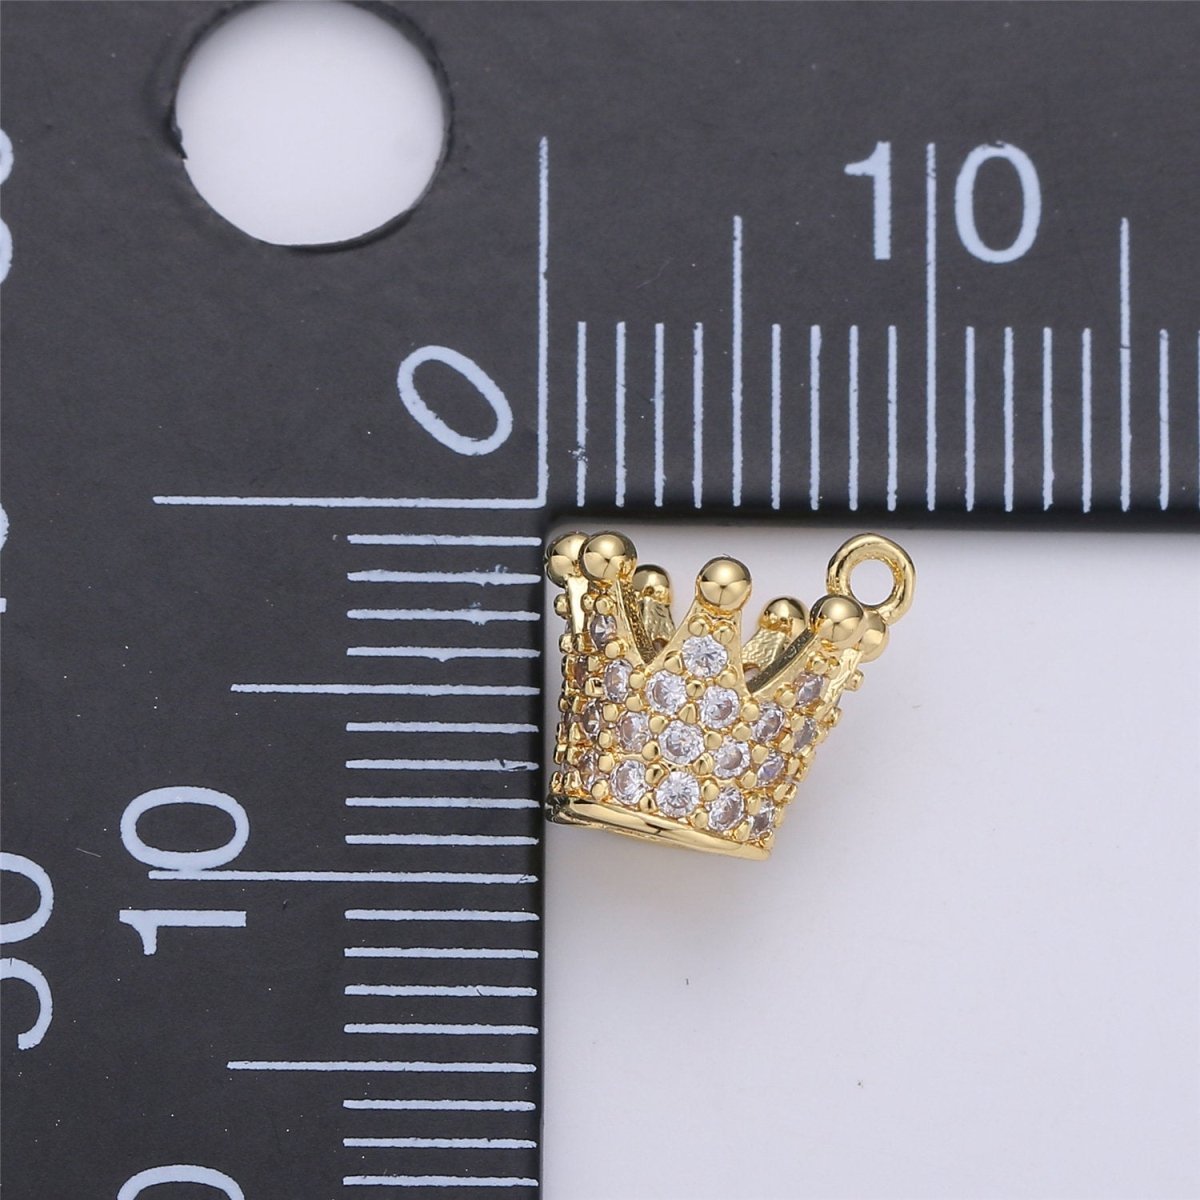 Dainty Micro Pave Gold Crown charm in 24k gold Filled Charm Cubic zirconia for Necklace Bracelet Earring Charm Jewelry Making supply C-679 - DLUXCA